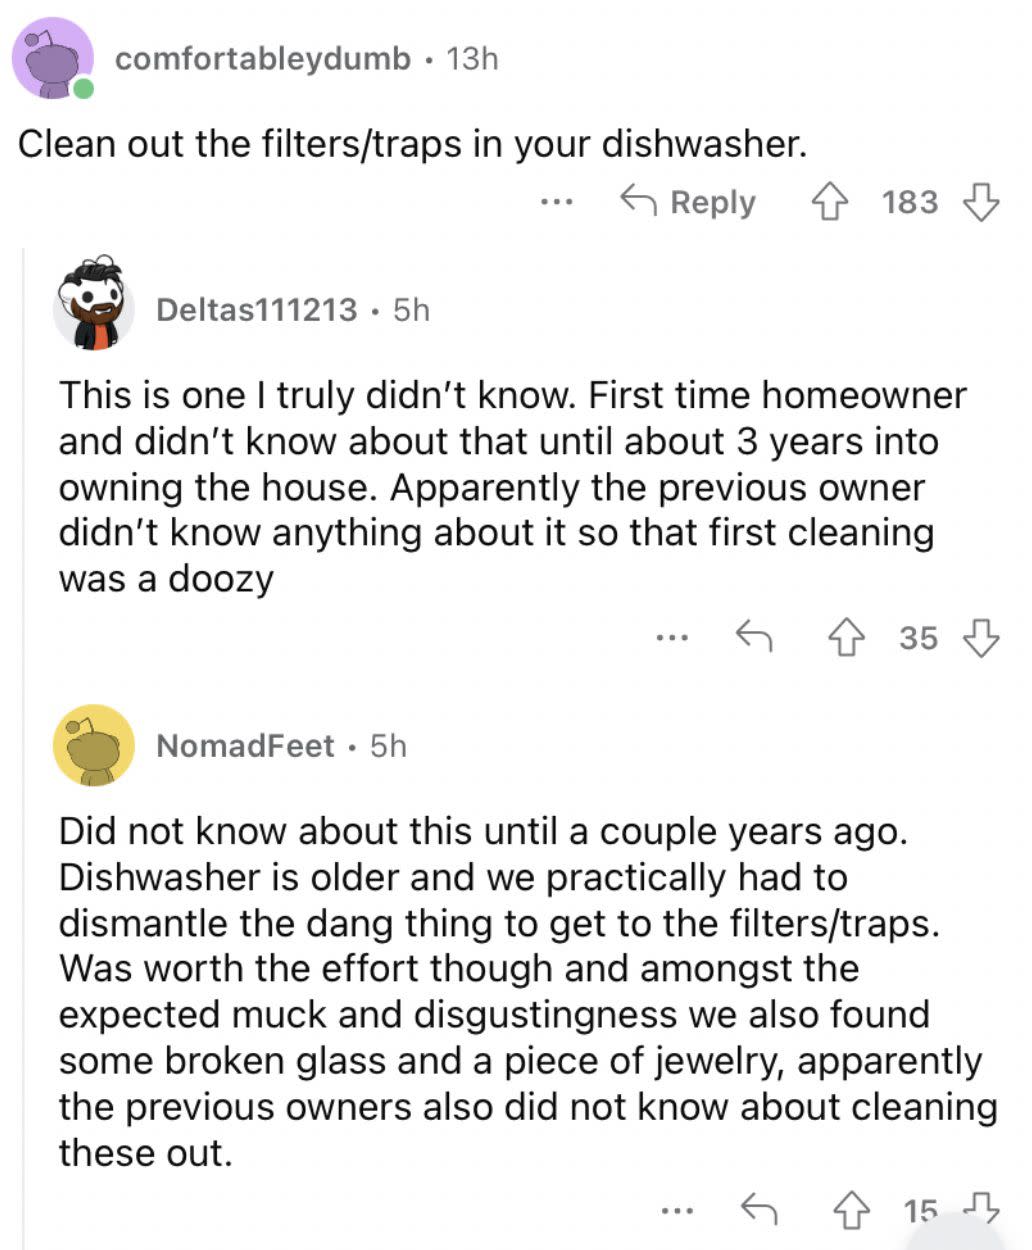 Reddit screenshot about cleaning out the filters in your dishwasher.